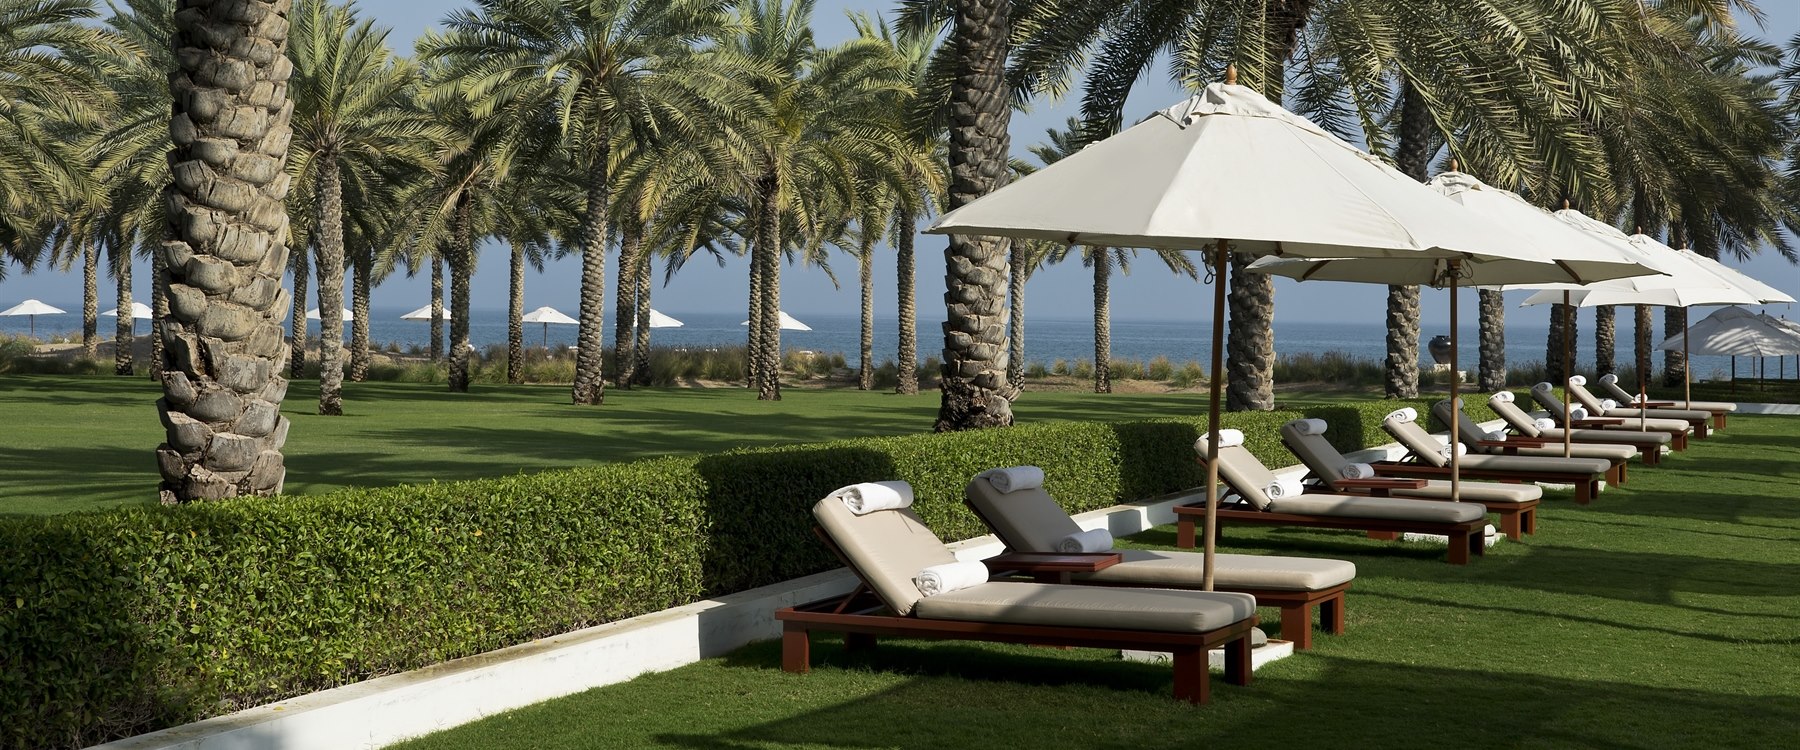 Gardens overview at The Chedi Muscat, Oman